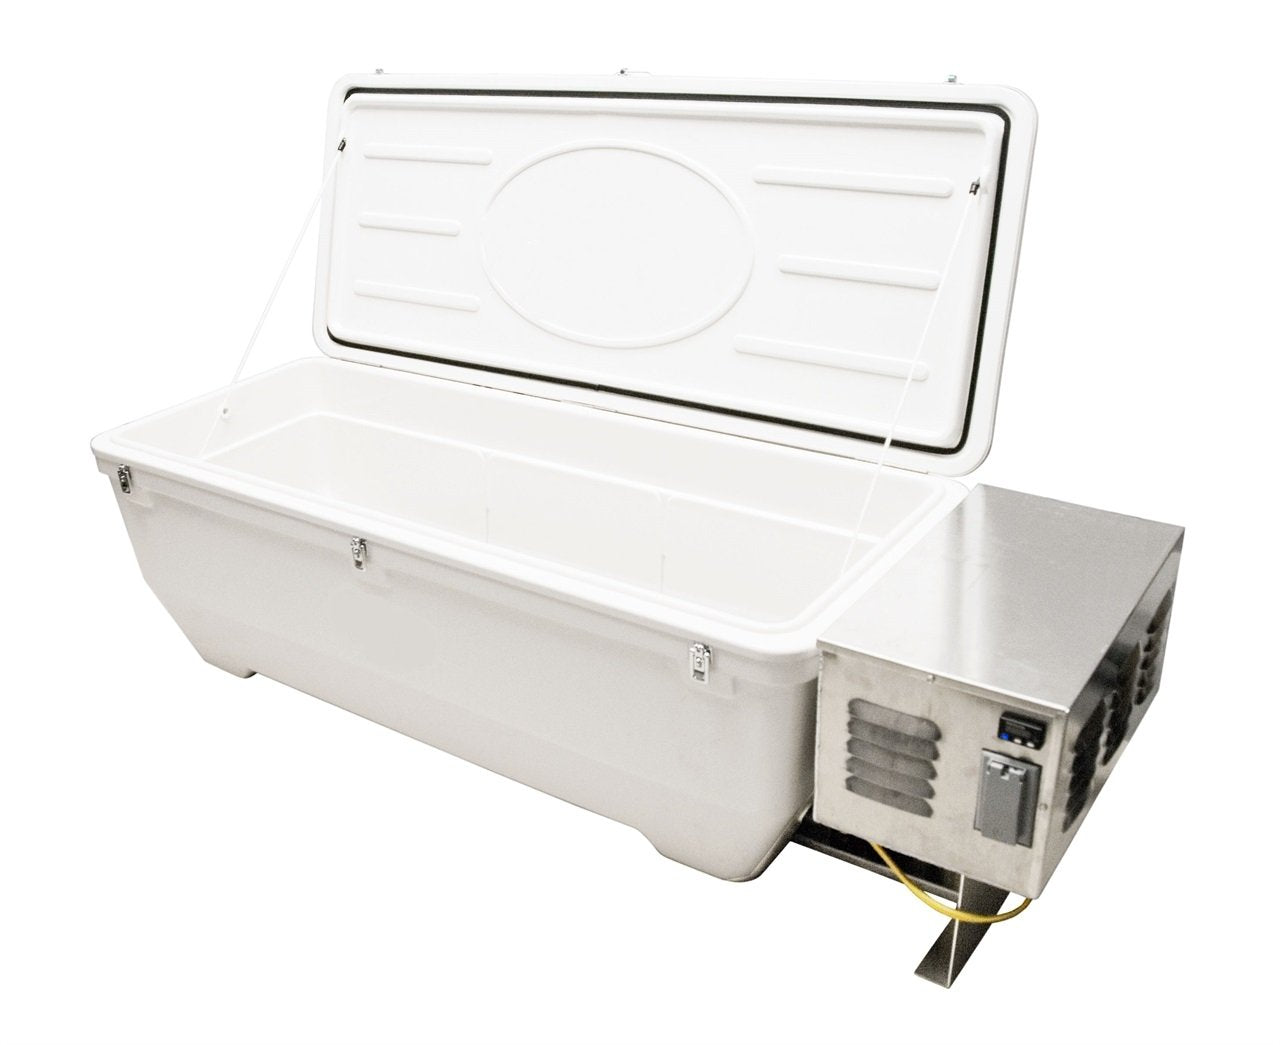 Thermocure Portable Curing Box (115V/60Hz)